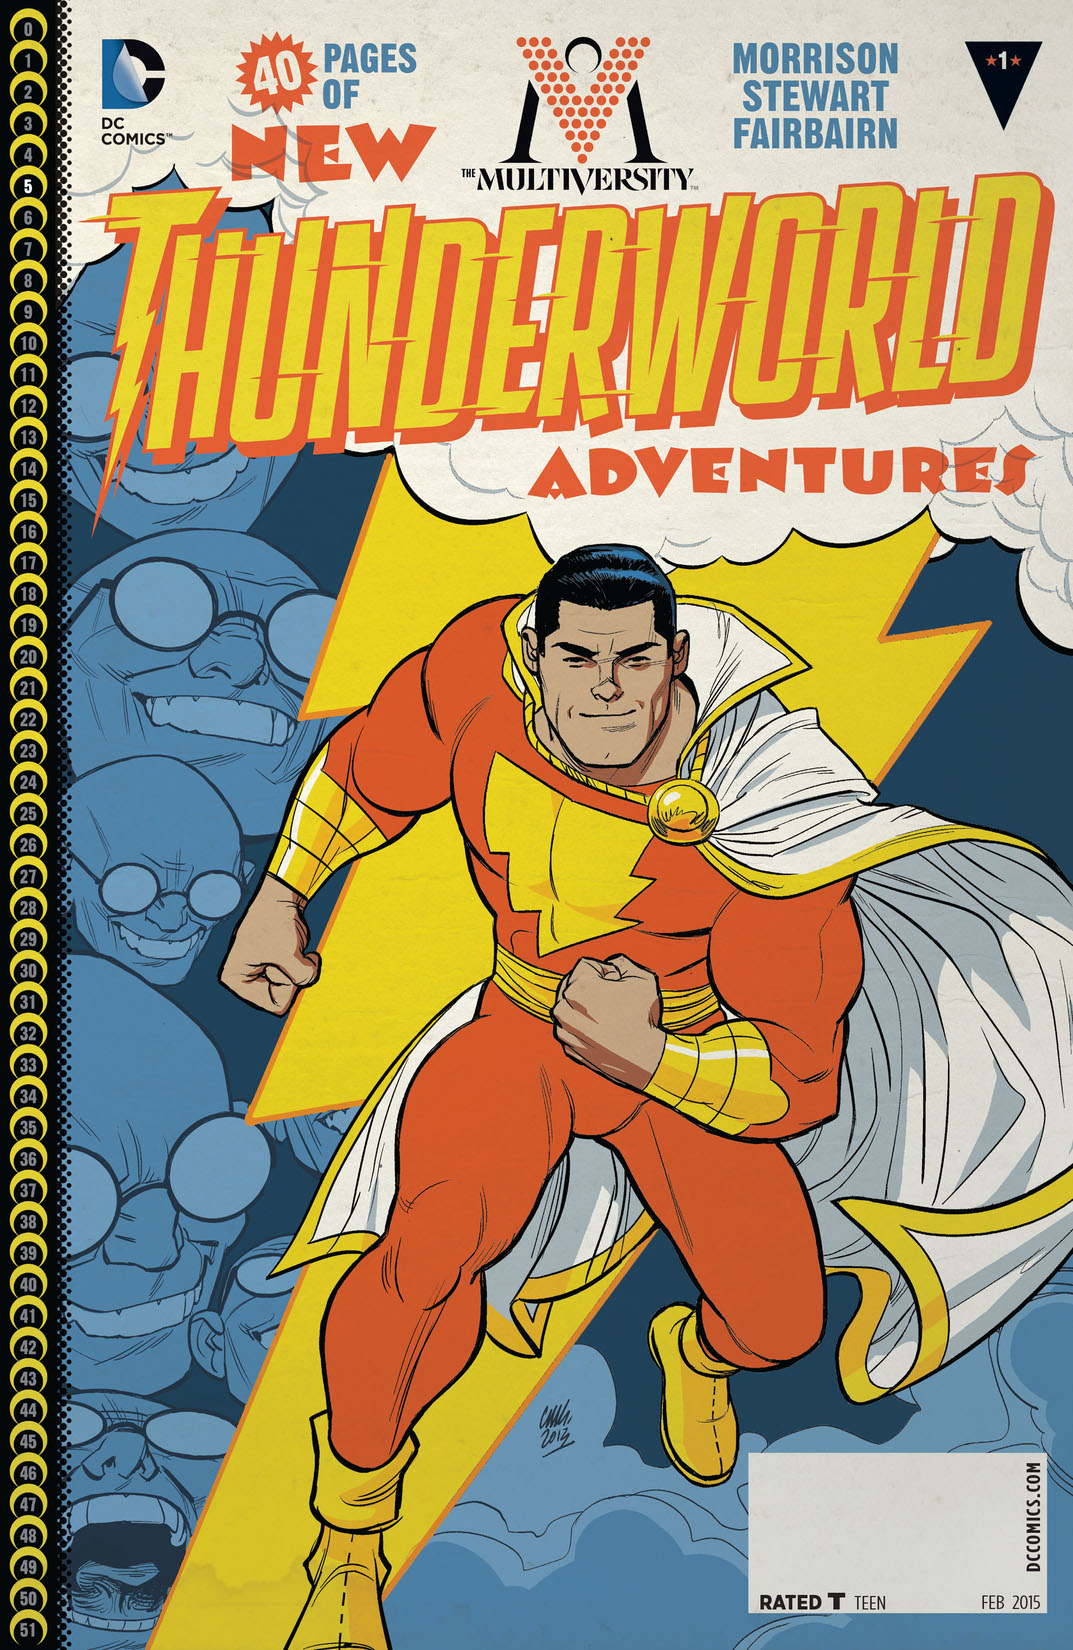 The Multiversity: Thunderworld Adventures #1 preview images